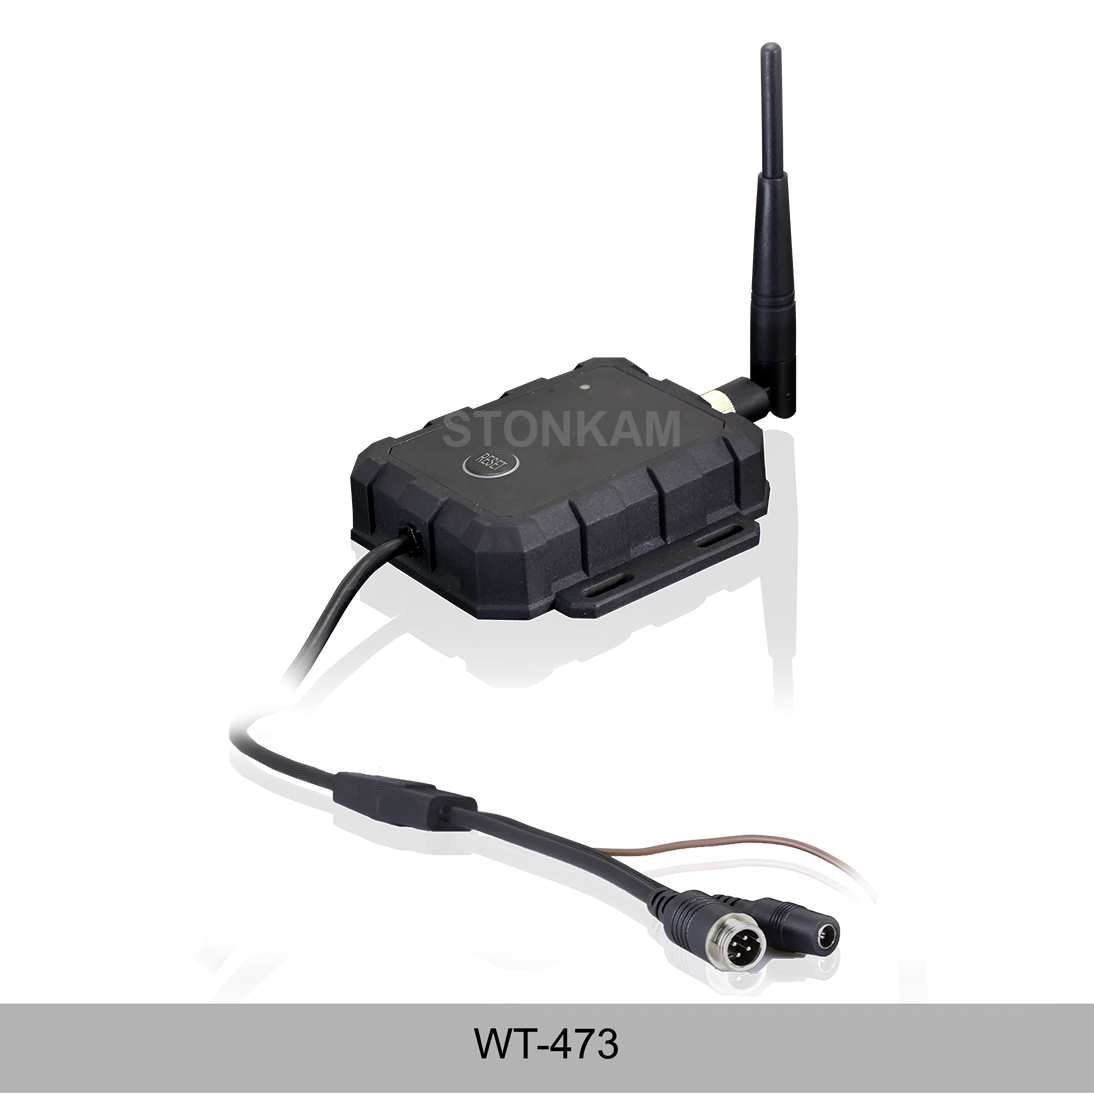 Waterproof WiFi Transmitter Compatible with Any Camera